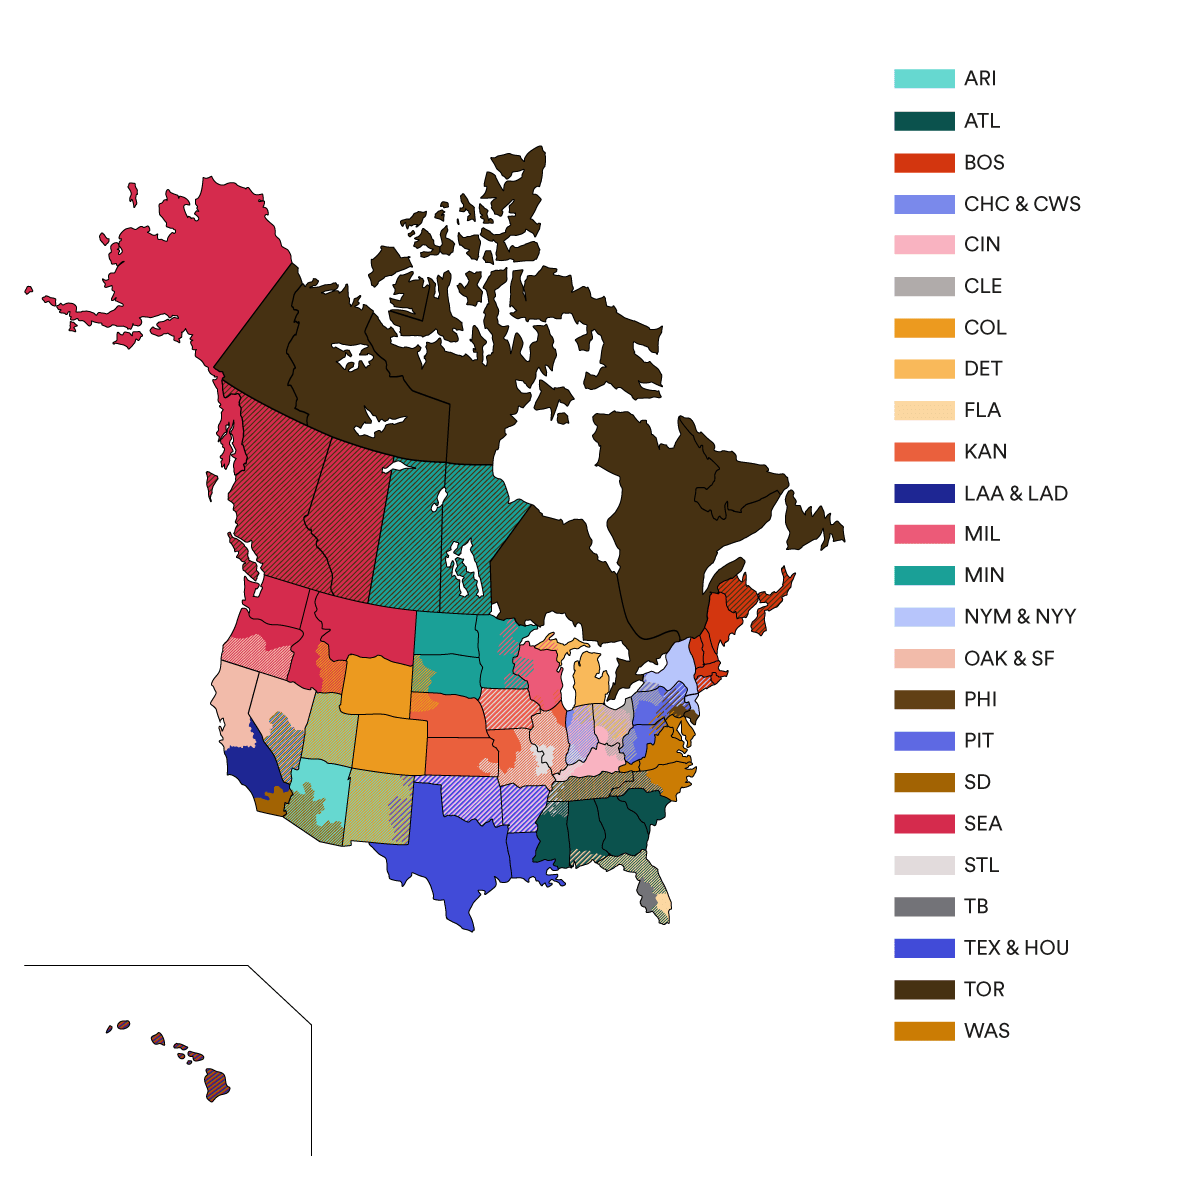 Map showing all blackout regions in the United States and Canada